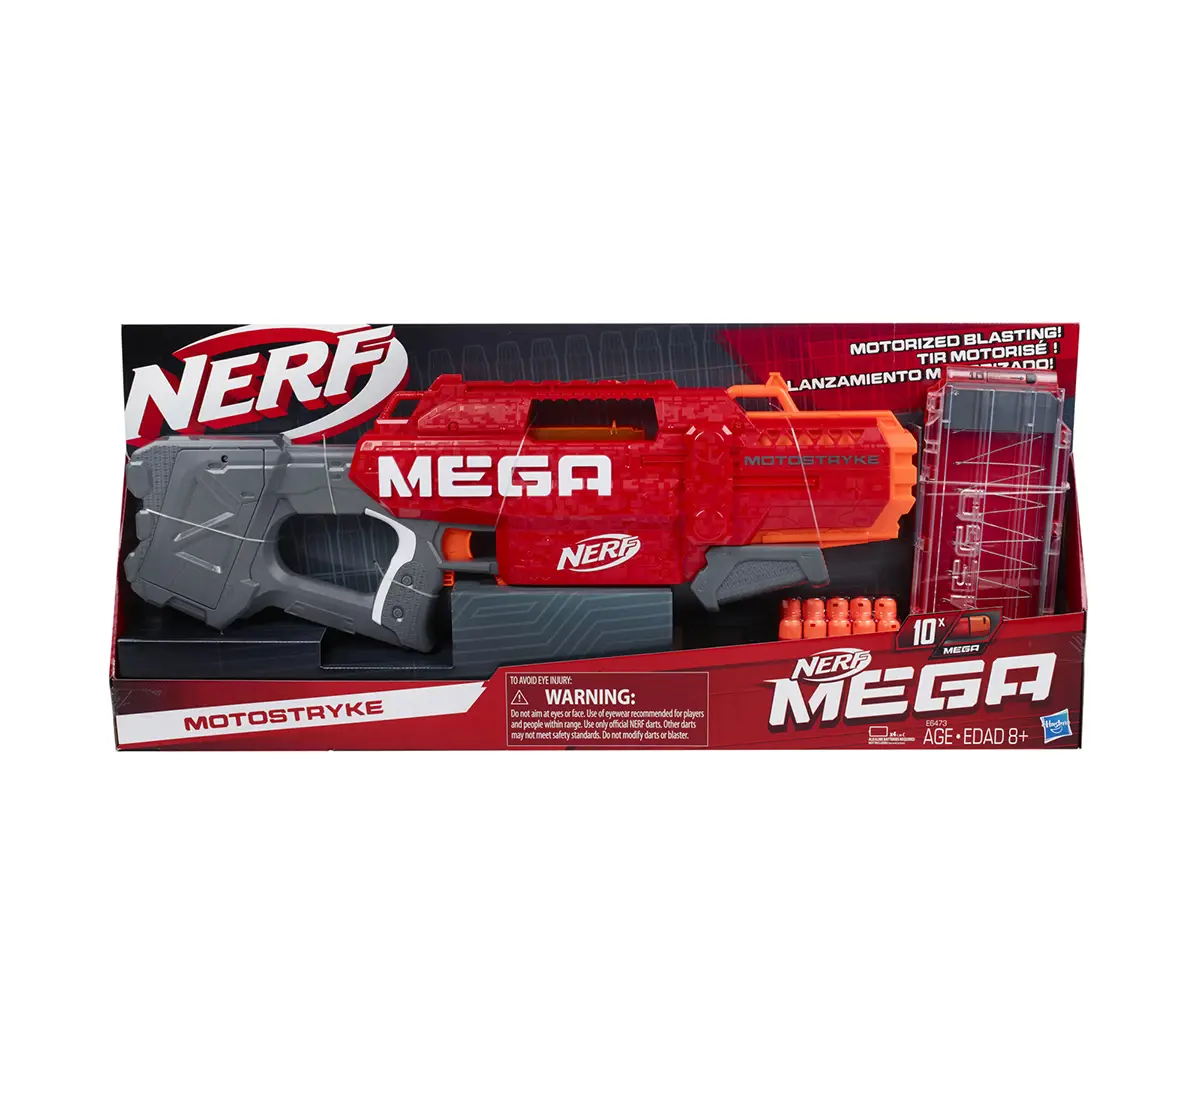 Nerf Mega Motostryke Motorized 10-Dart Blaster --  Includes 10 Official Nerf Mega Darts and 10-Dart Clip -- For Kids, Teens, Adults Blasters for age 8Y+